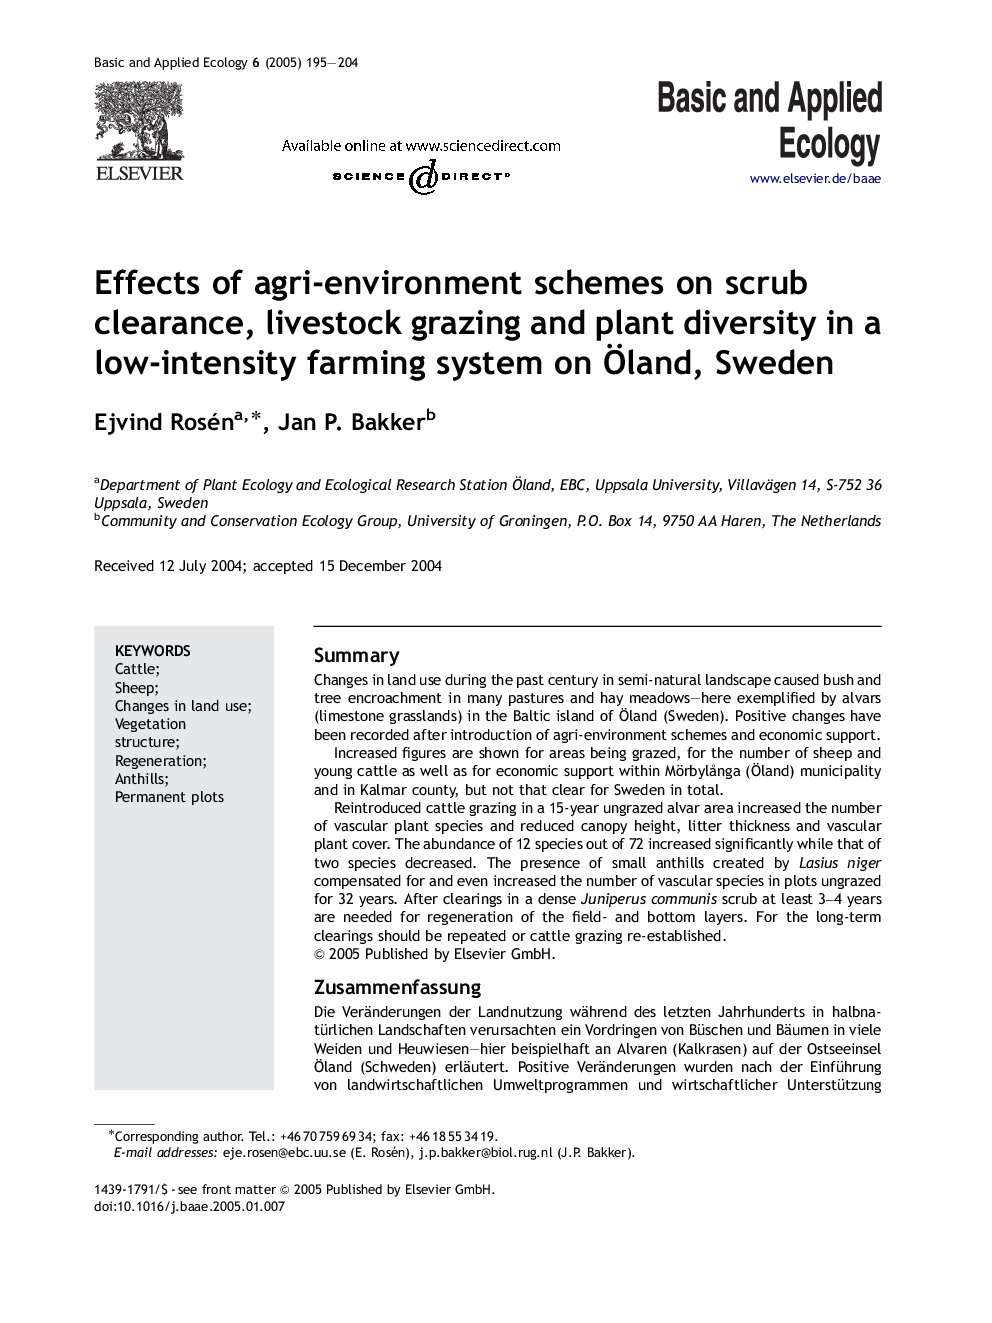 Effects of agri-environment schemes on scrub clearance, livestock grazing and plant diversity in a low-intensity farming system on Ãland, Sweden